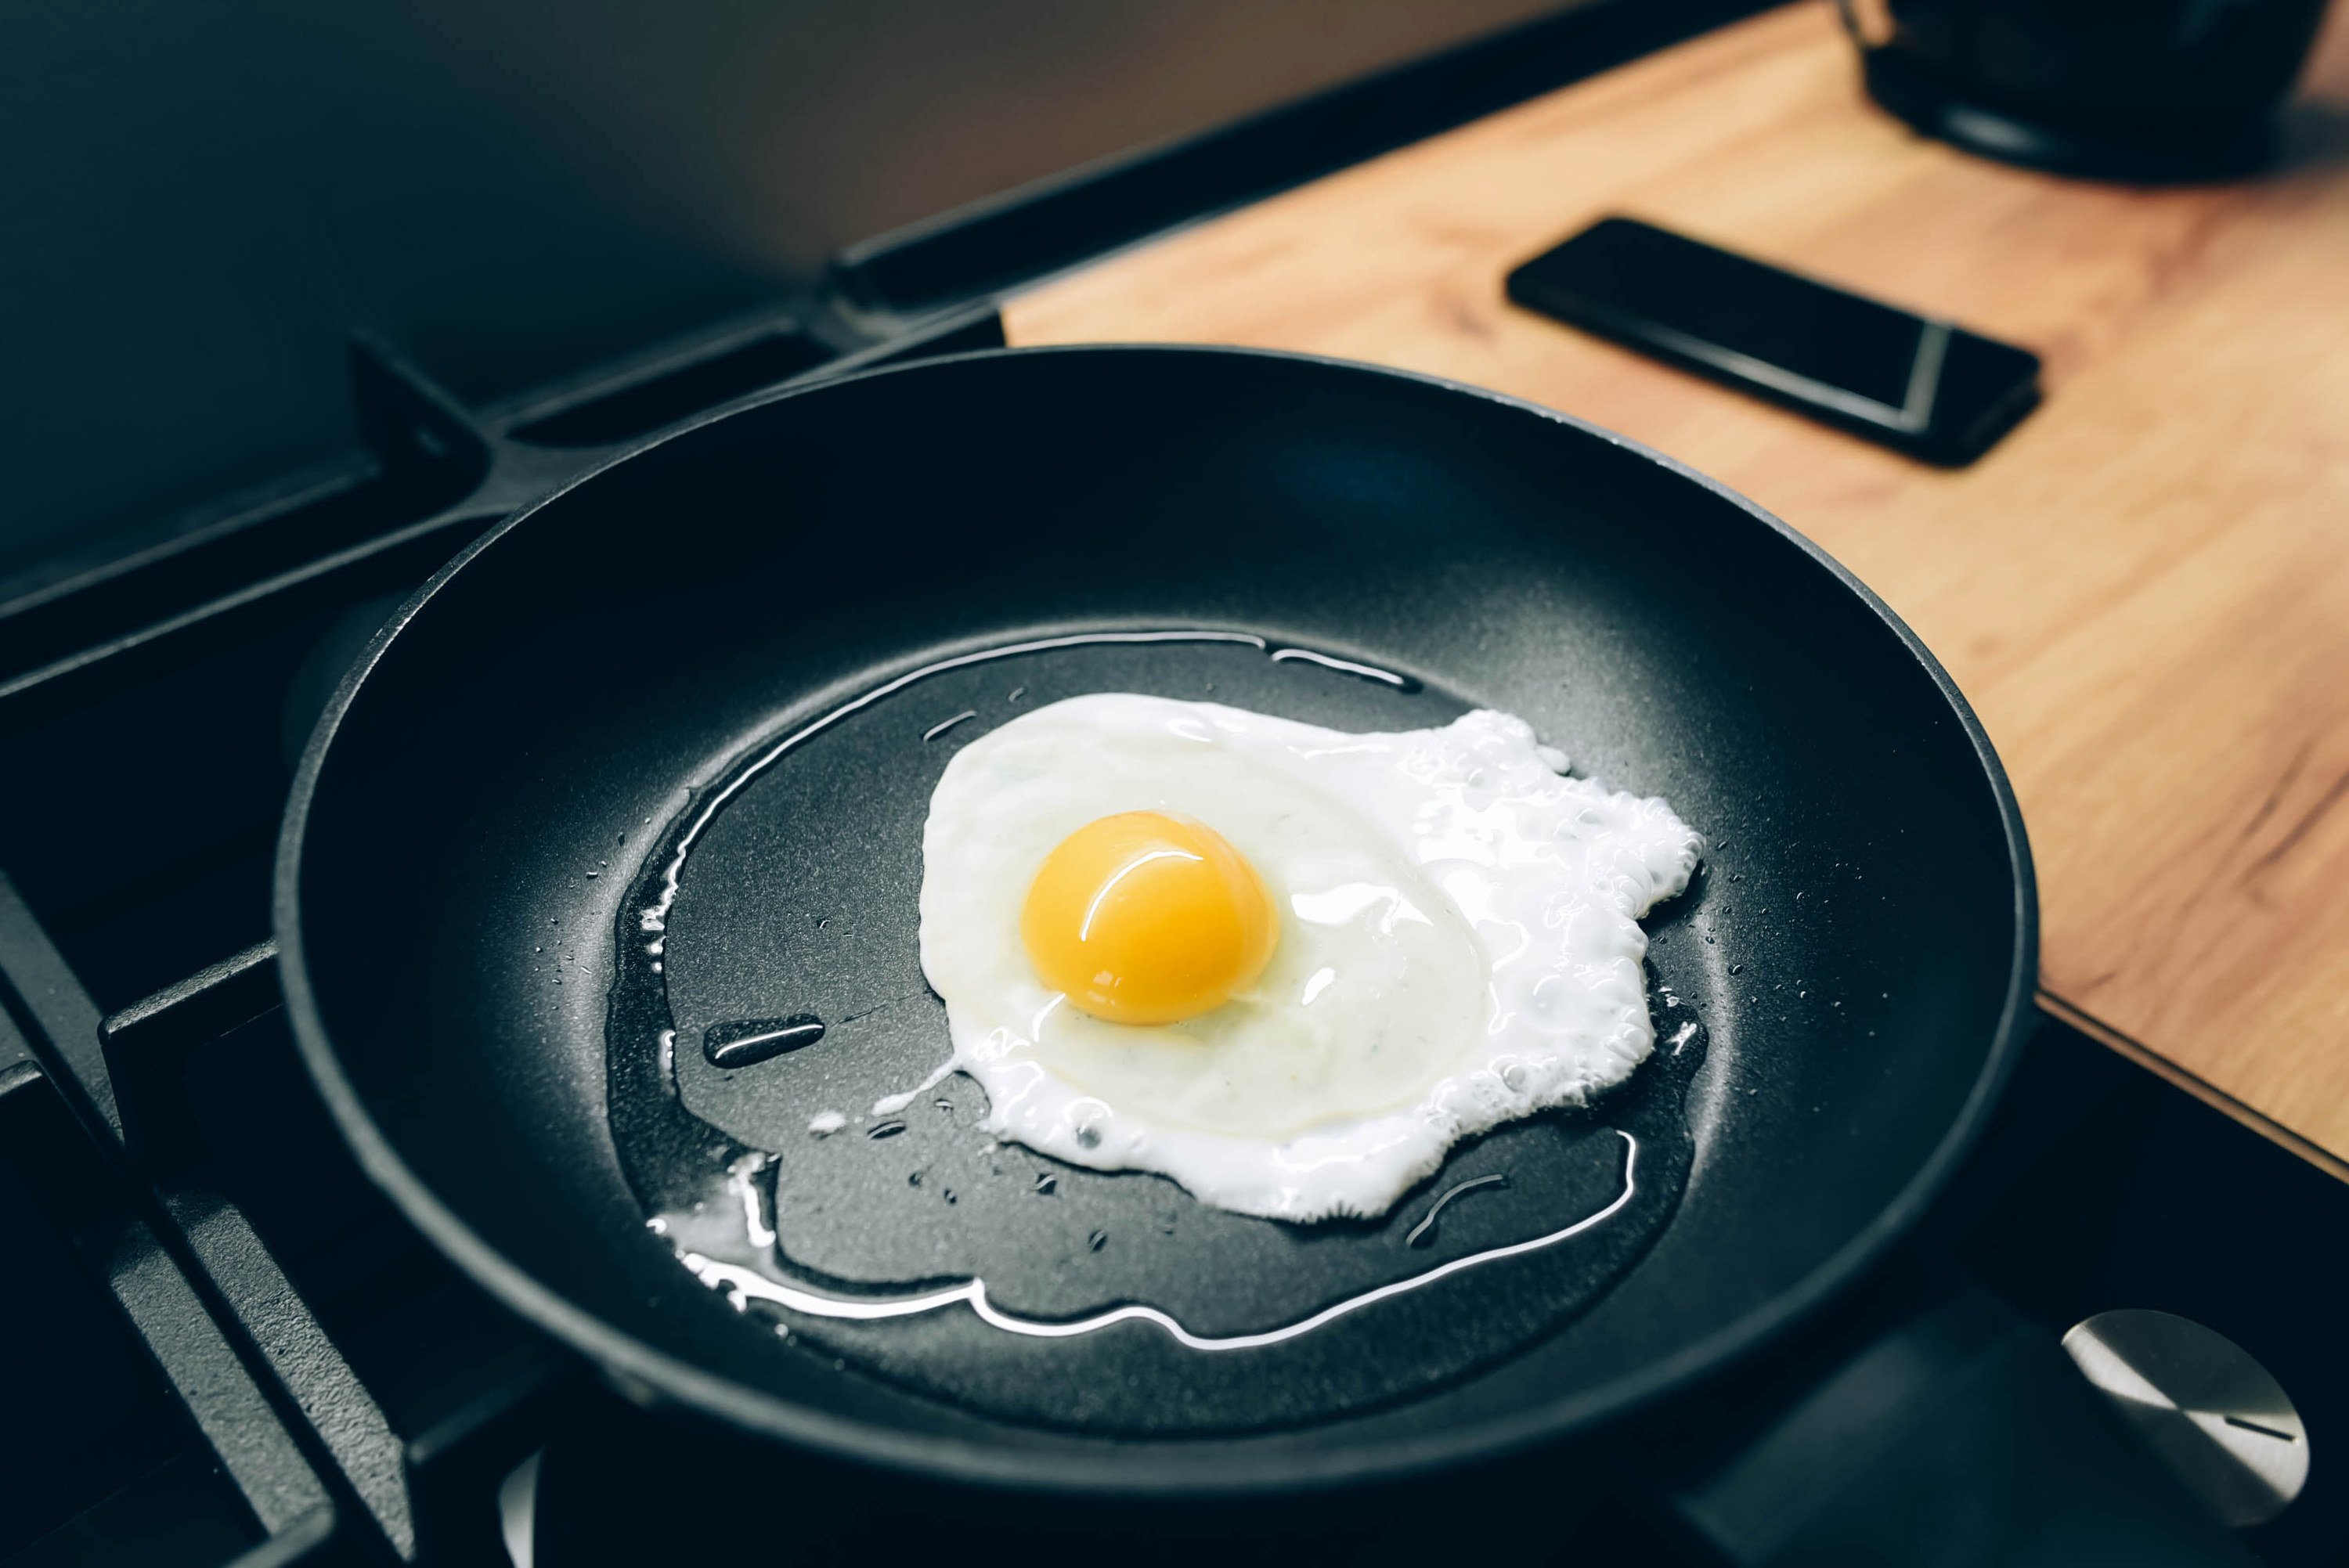 a pan with an egg in it